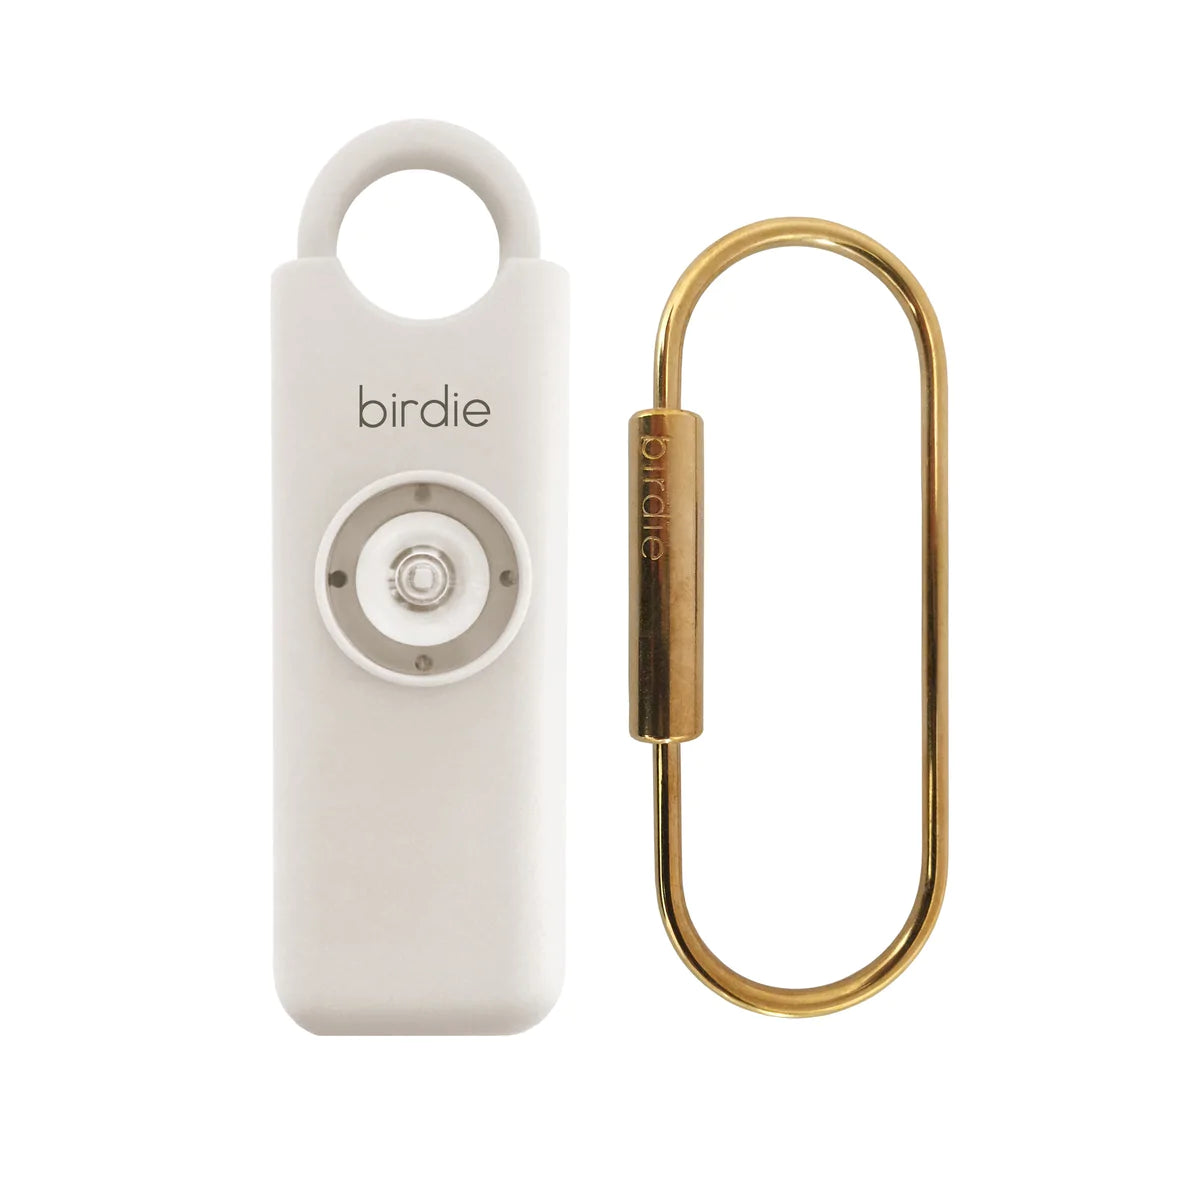 She's Birdie Personal Safety Alarm - 7 Colors